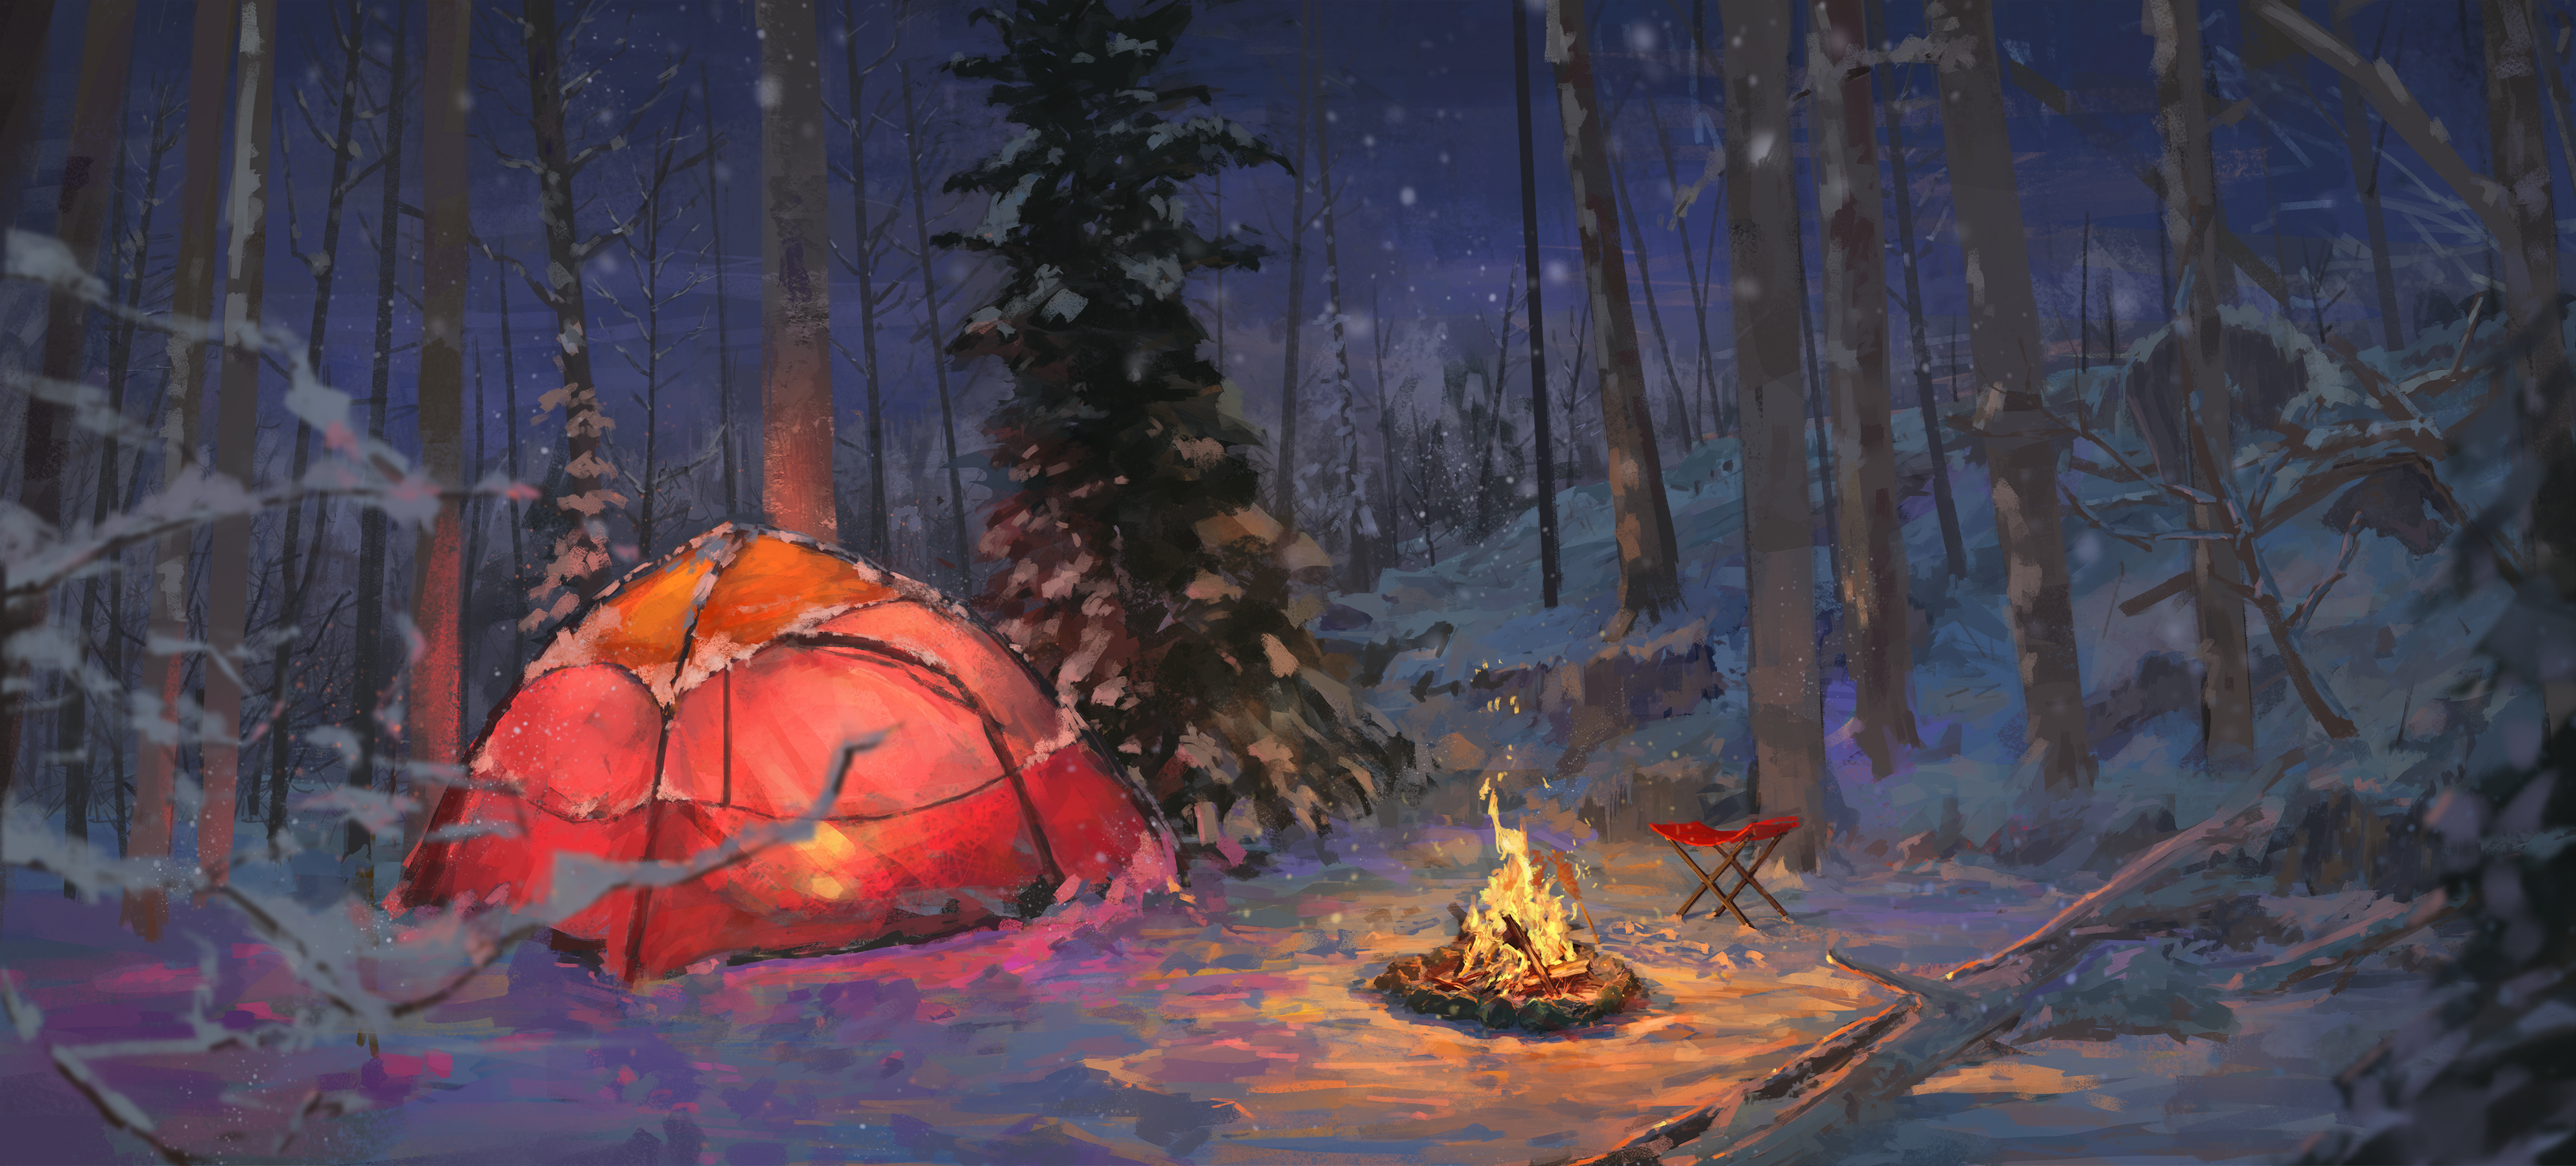 Night Snow Forest Tent Camp Fire 3973x1799